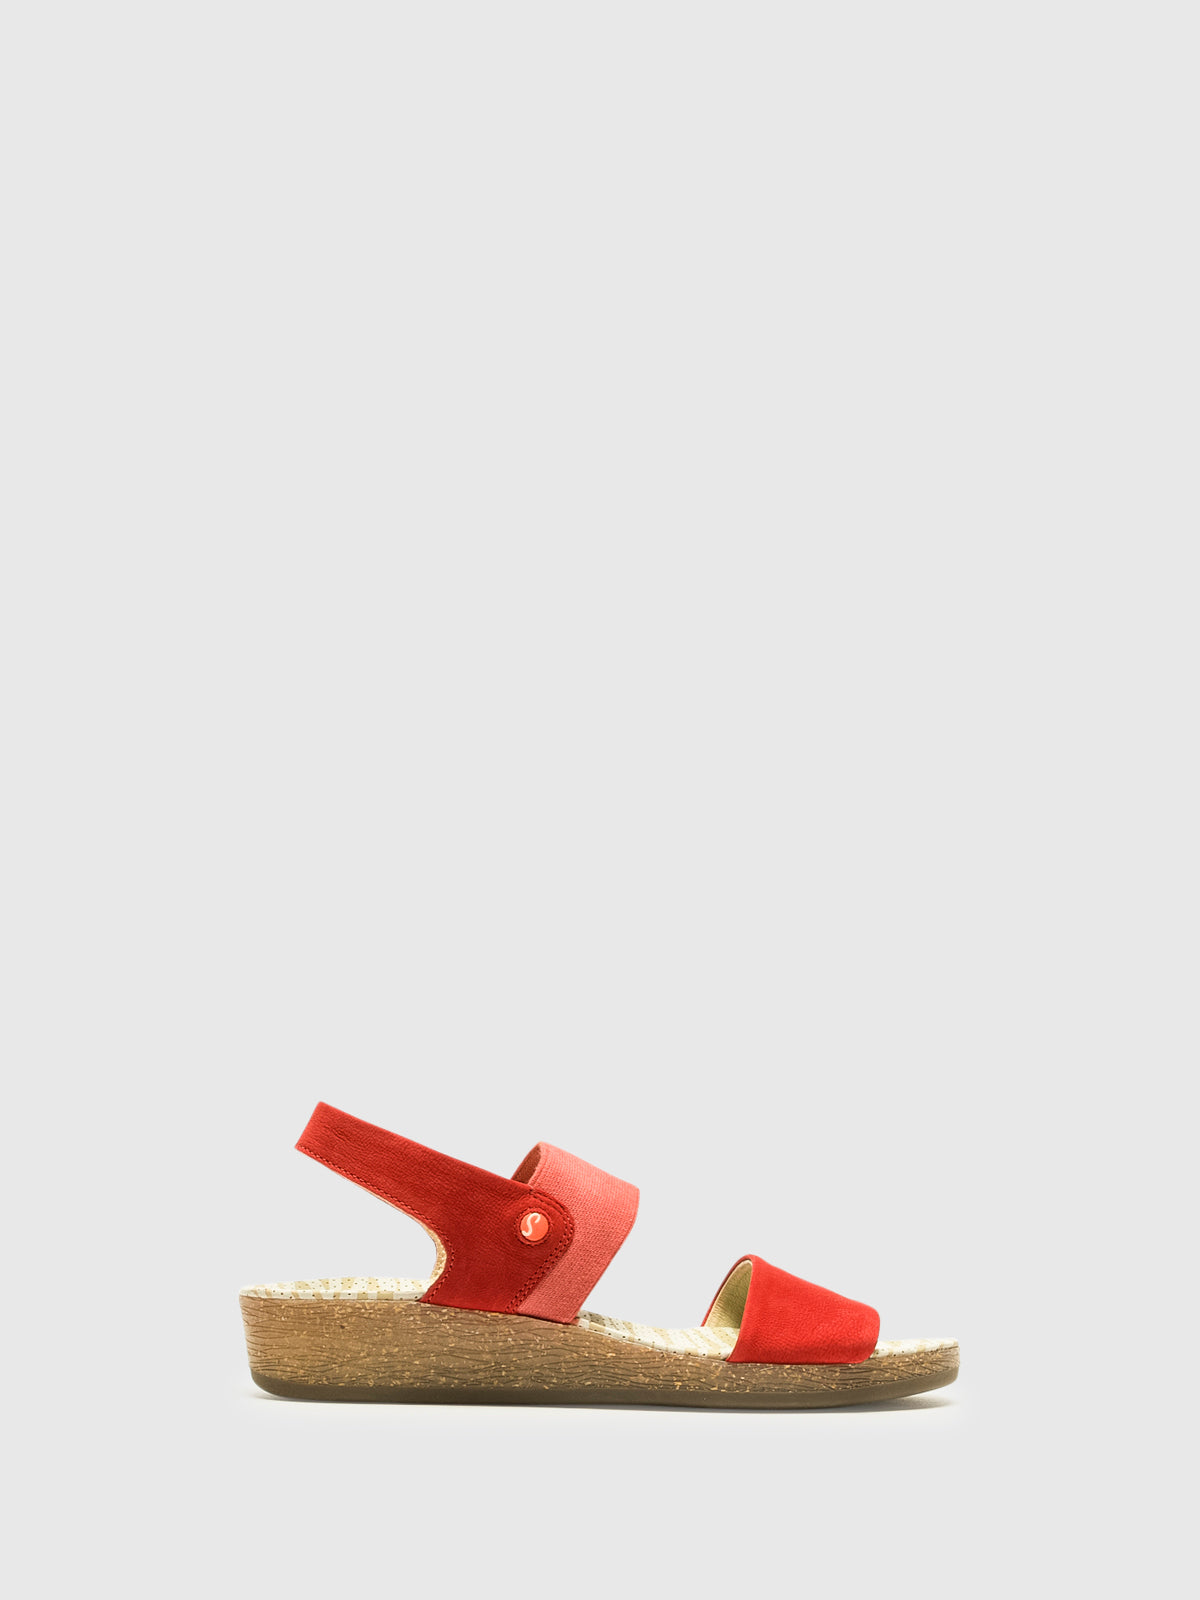 Softinos Red Strappy Sandals